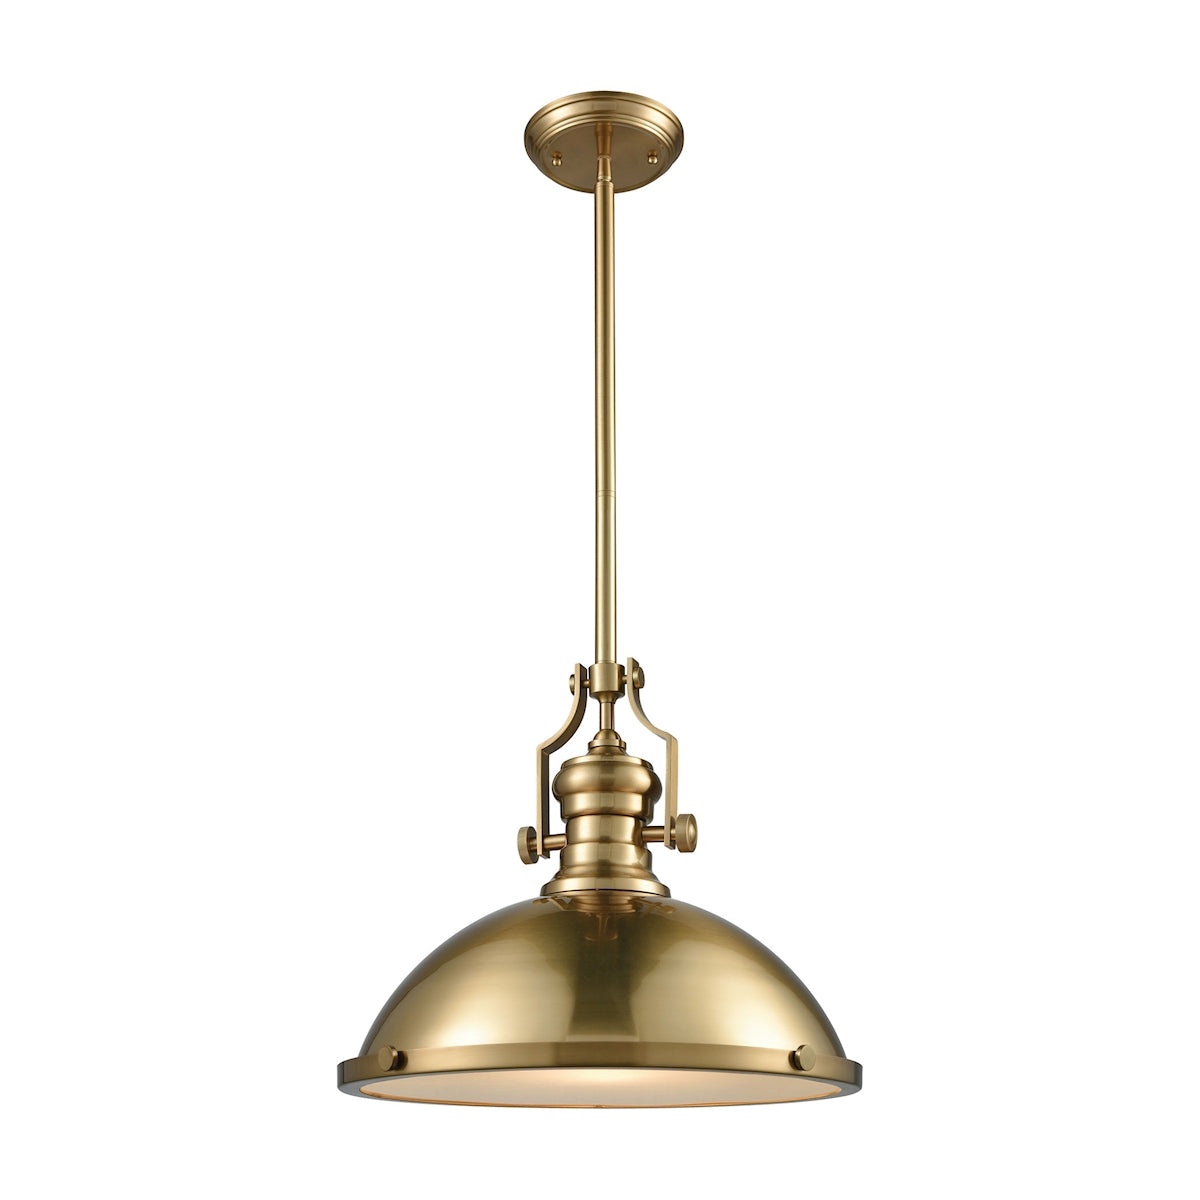 ELK Lighting 66598-1 Chadwick 1-Light Pendant in Satin Brass with Metal and Frosted Glass Diffuser